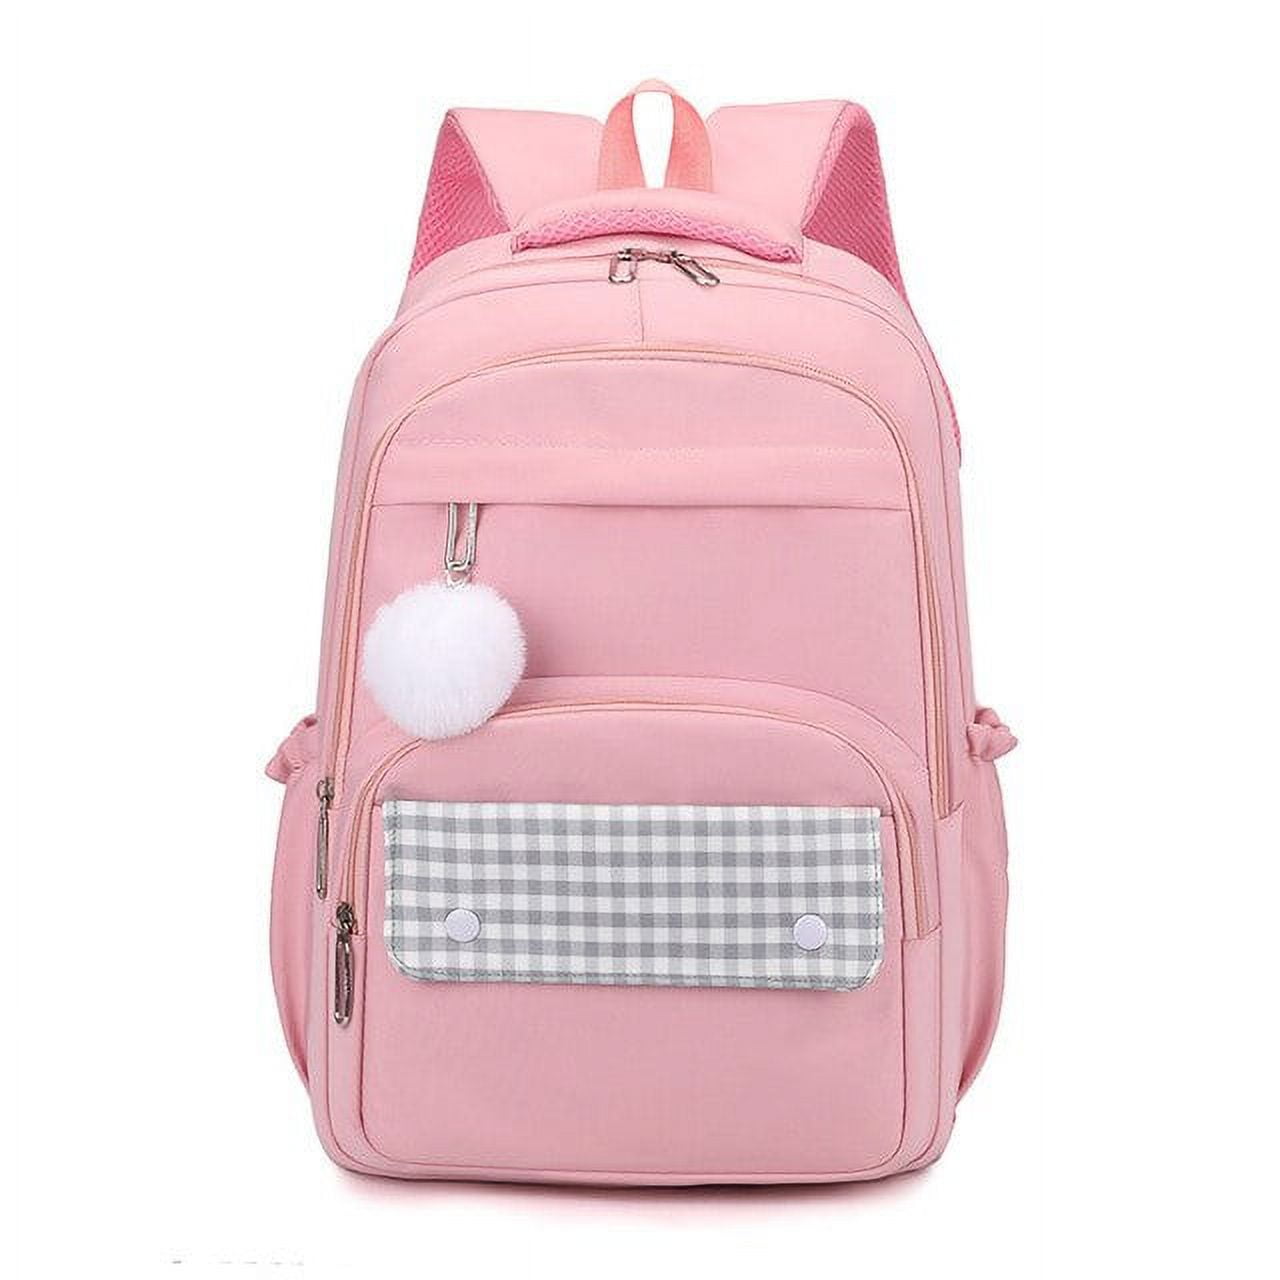 CoCopeaunt Girls School Bags for Teenagers Middle Student High School  Backpack Women Nylon Pink Multifunction Bookbag 